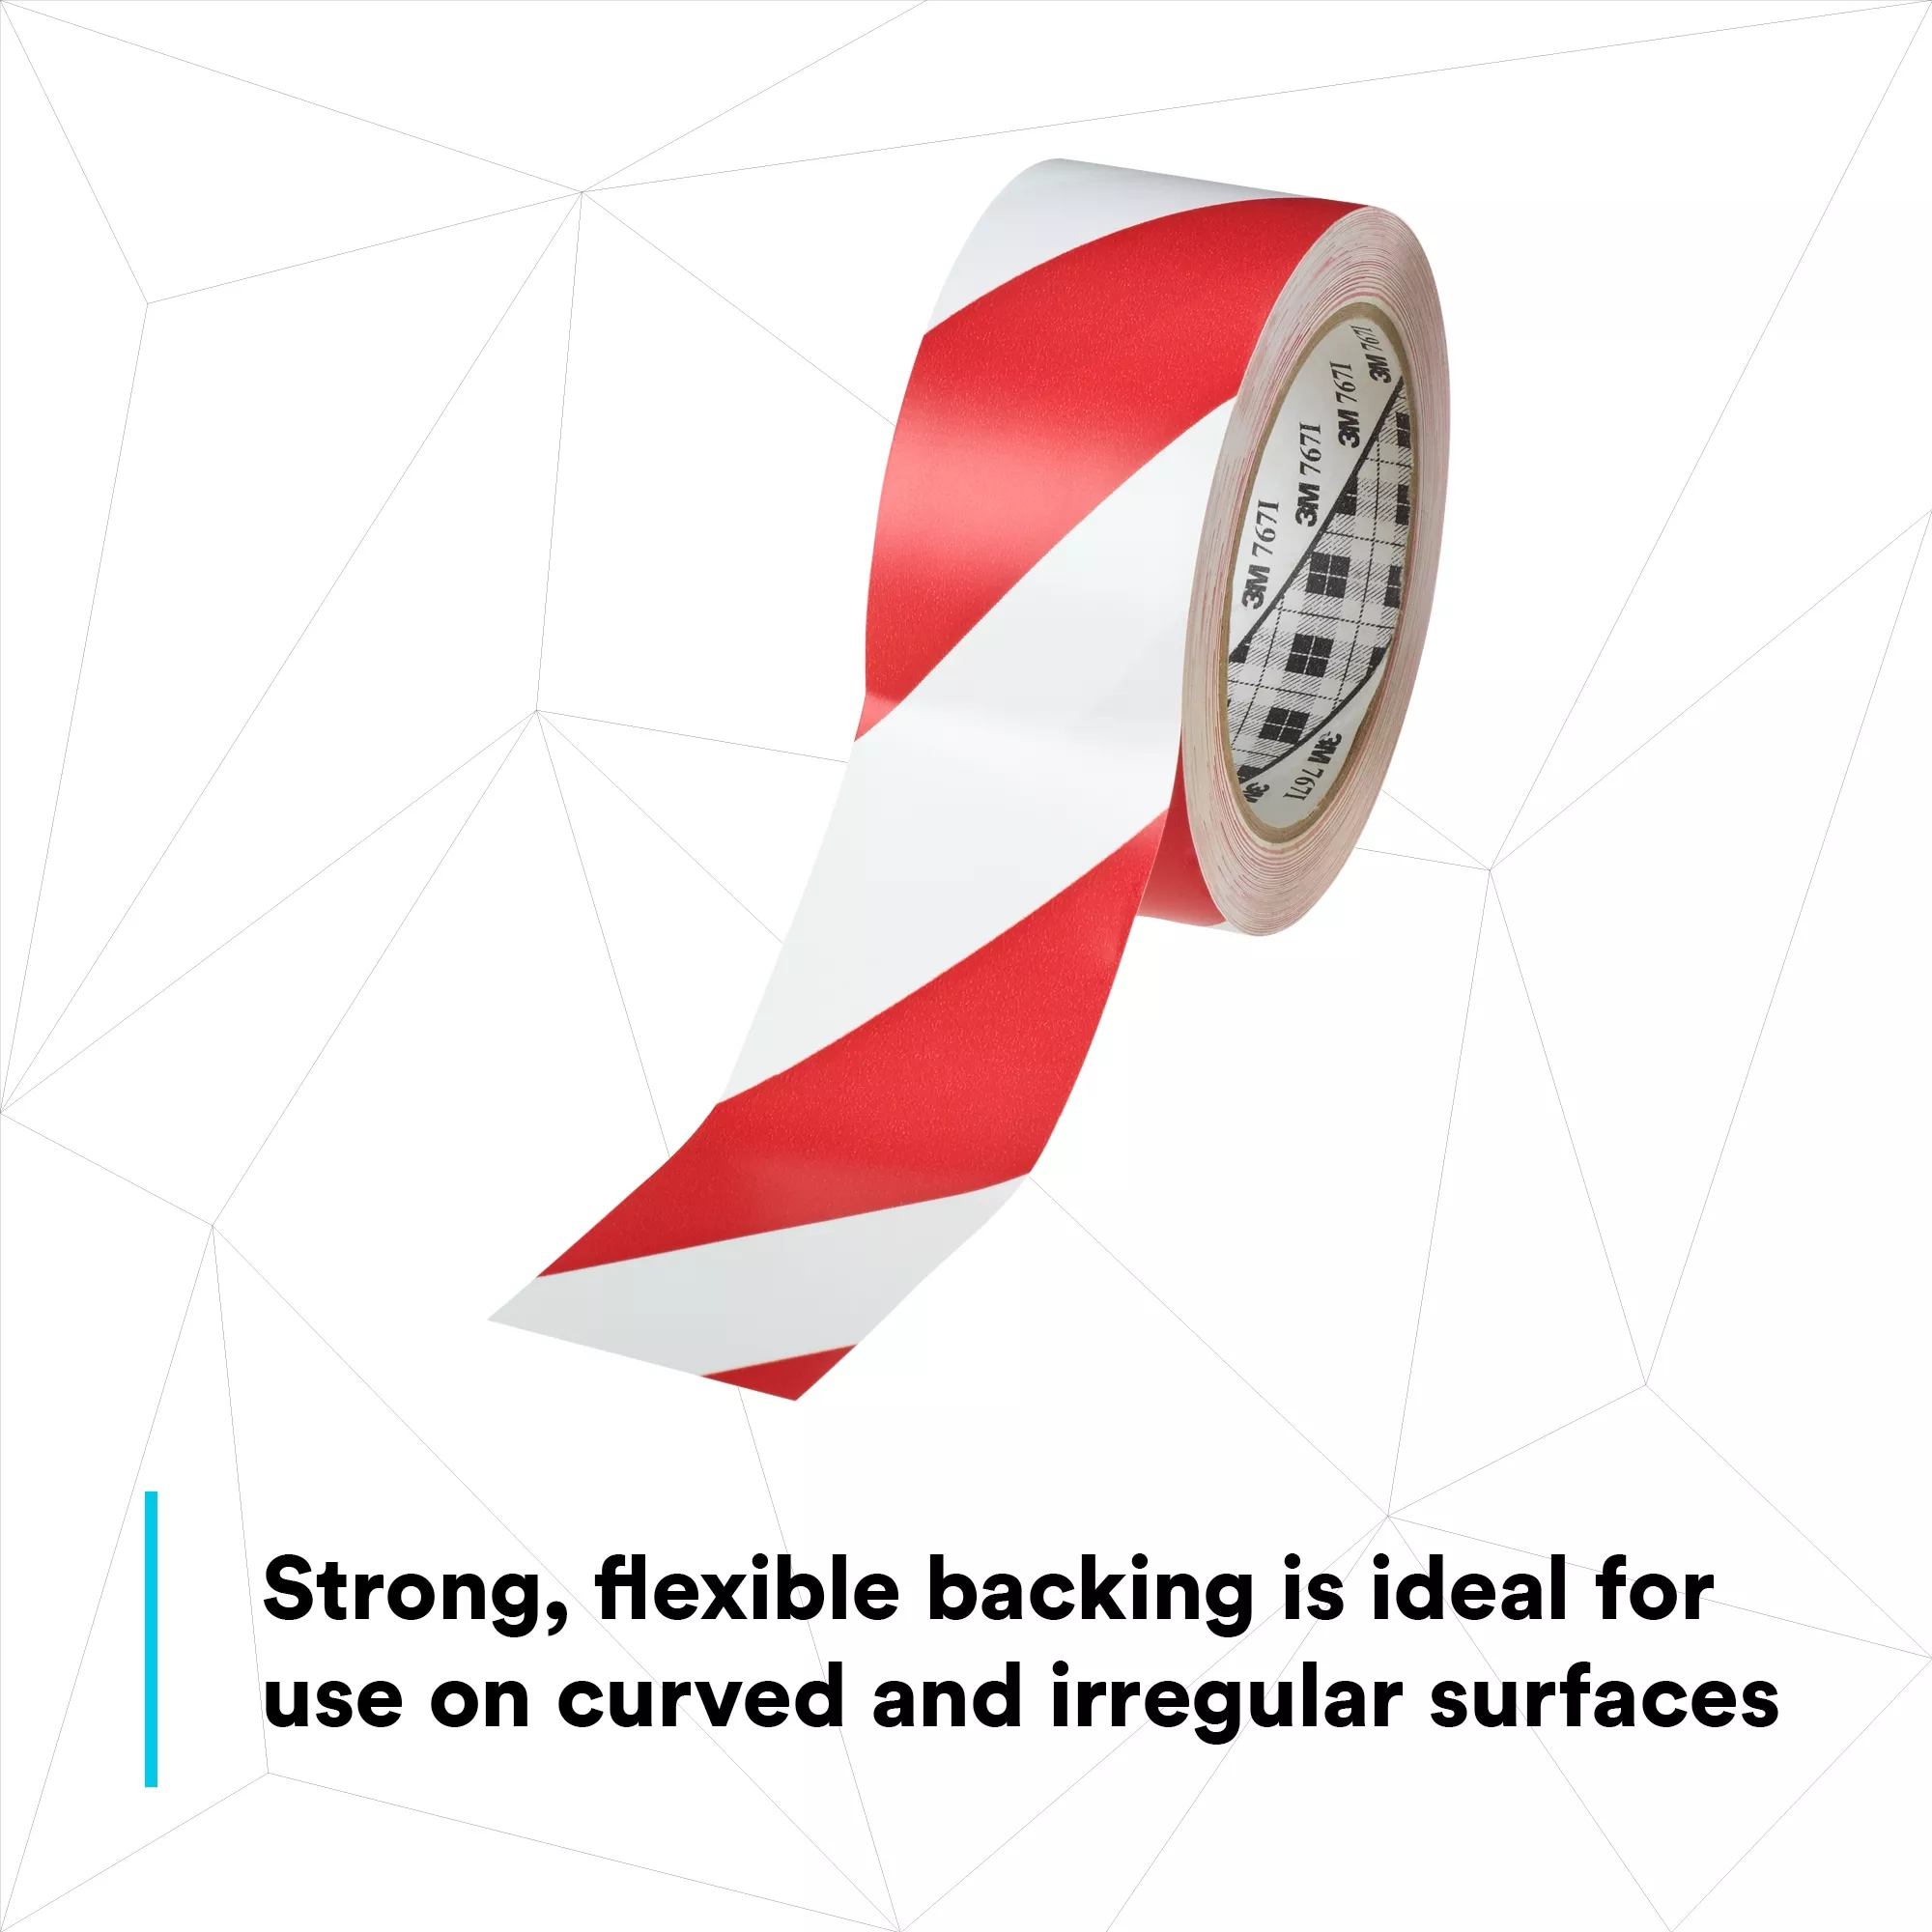 Product Number 767 | 3M™ Safety Stripe Vinyl Tape 767